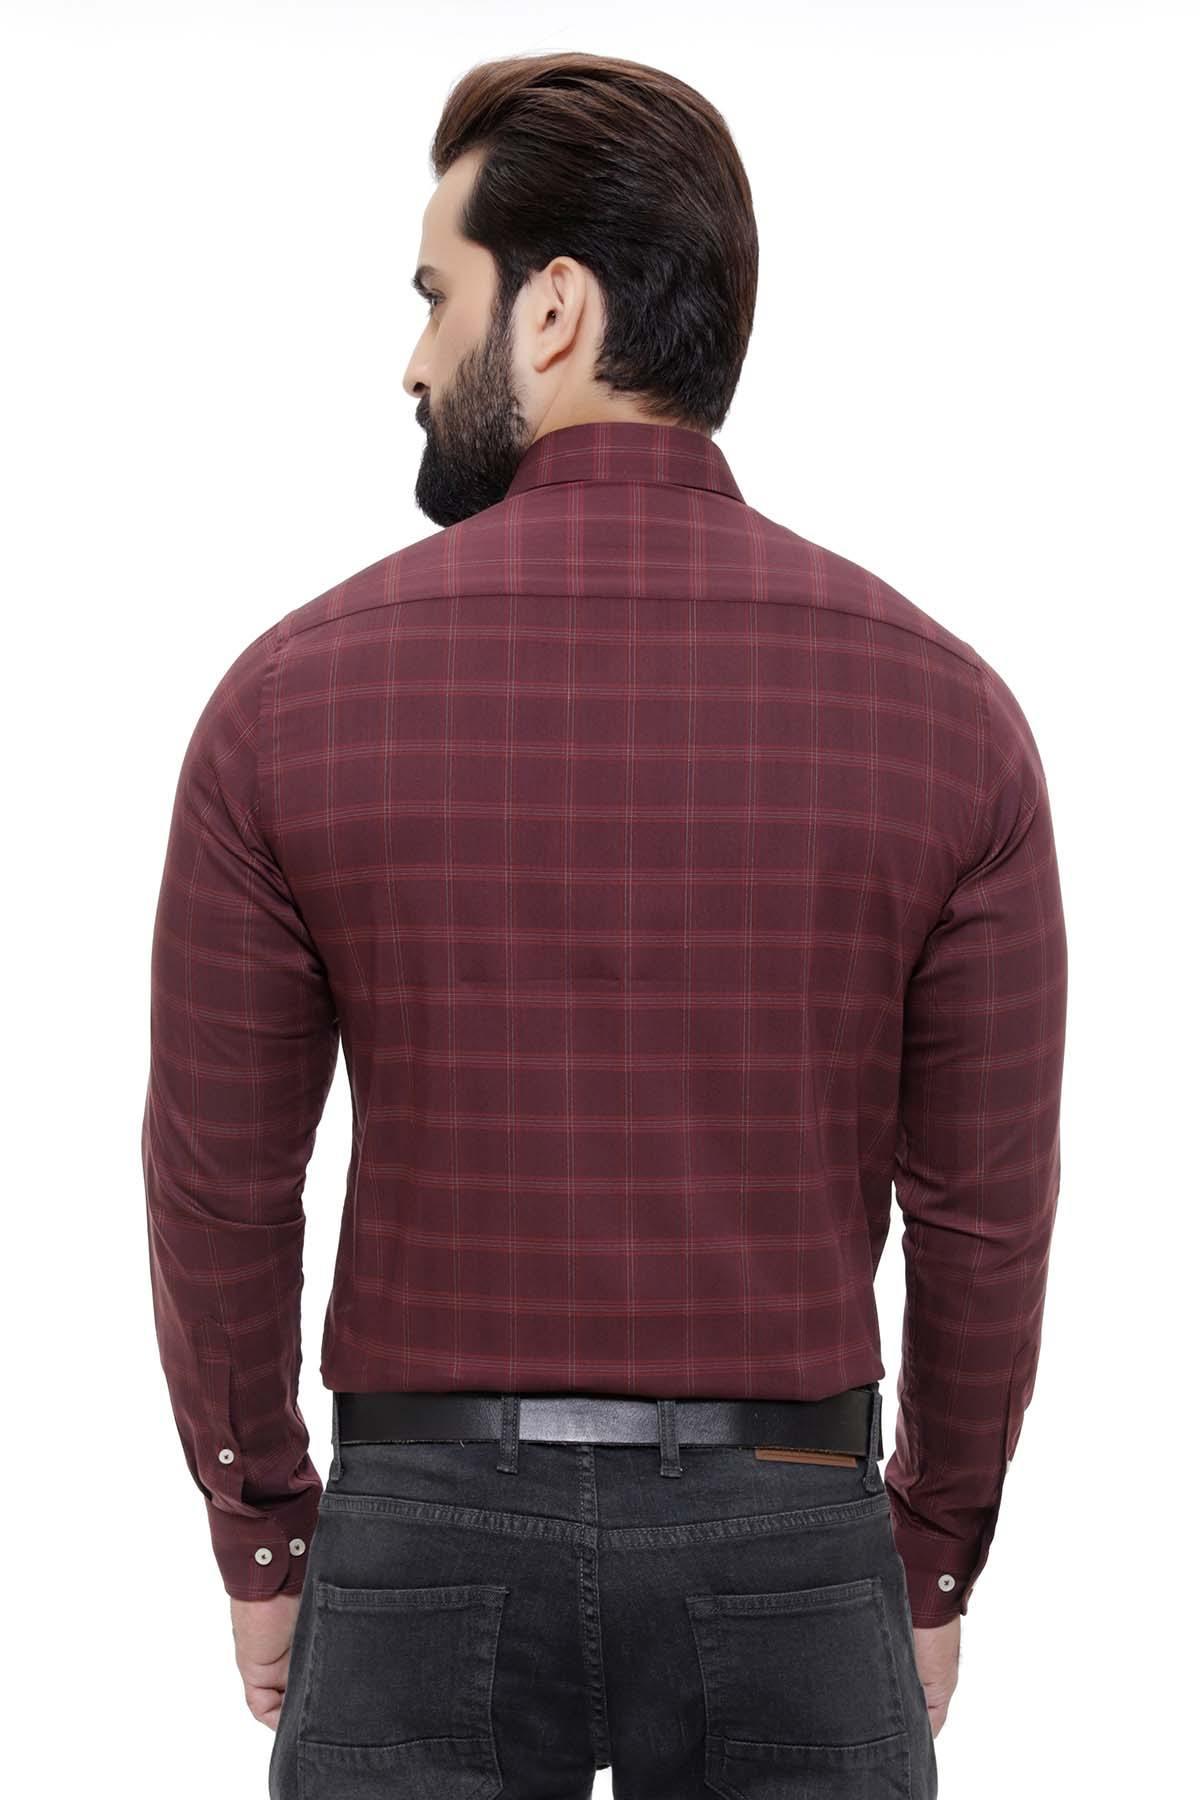 SEMI FORMAL SHIRTS BUTTON DOWN FULL SLEEVE MAROON at Charcoal Clothing